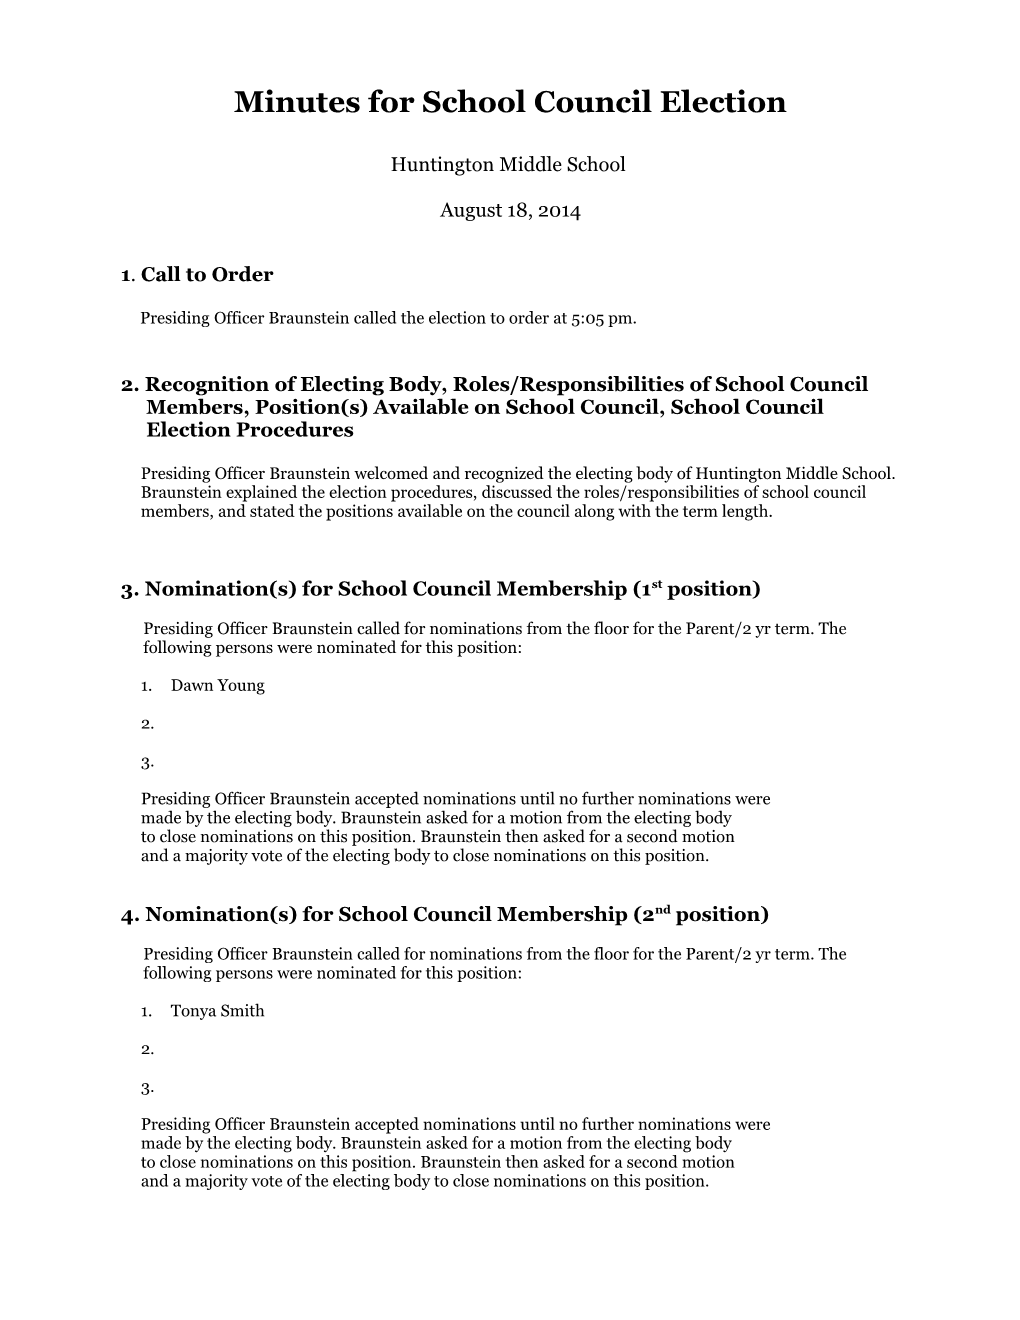 Sample Agenda for School Council Meeting